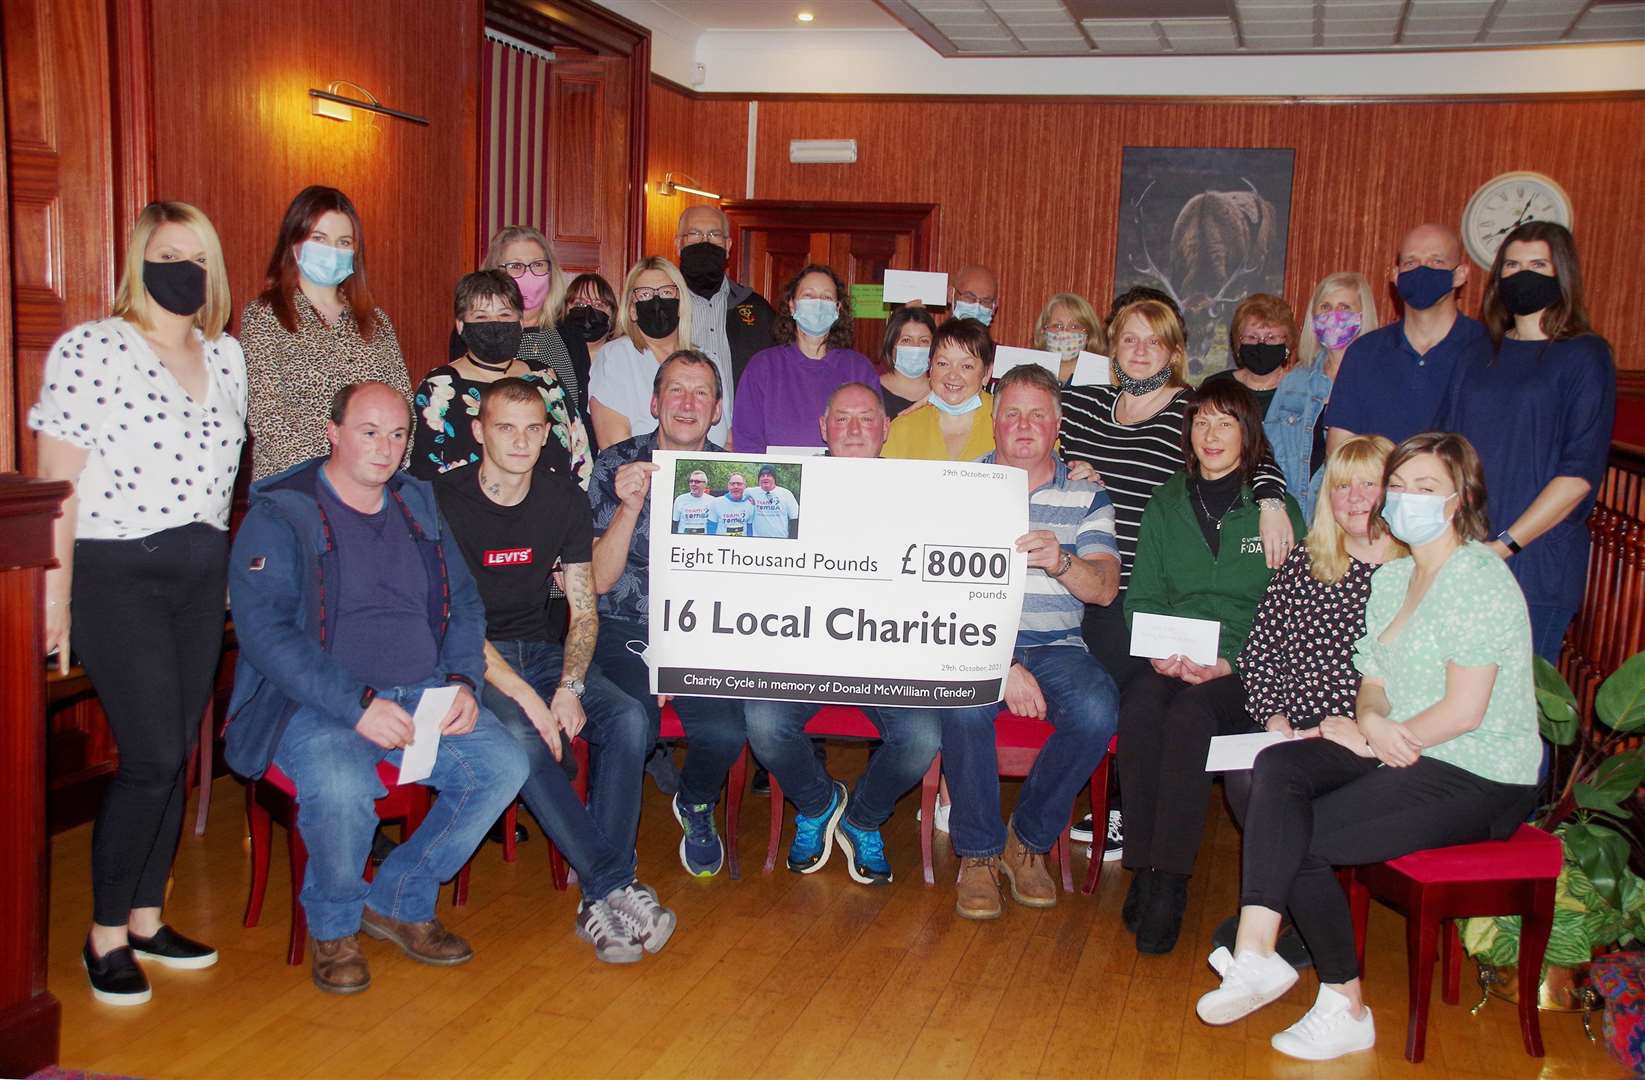 Representatives of the 16 good causes at the handover event in the Seaforth Highlanders' Club in Wick, with charity cyclists Willie MacDonald (seated, centre) and Arthur Bruce (seated, centre right), back-up drivers Neil Pellow (seated, centre left) and Martin Gibson (seated, second from left), along with Donald (Tender) McWilliam's daughters Lynne Davidson (front left) and Lauren McWilliam (seated, far right). Picture: Ian McDonald